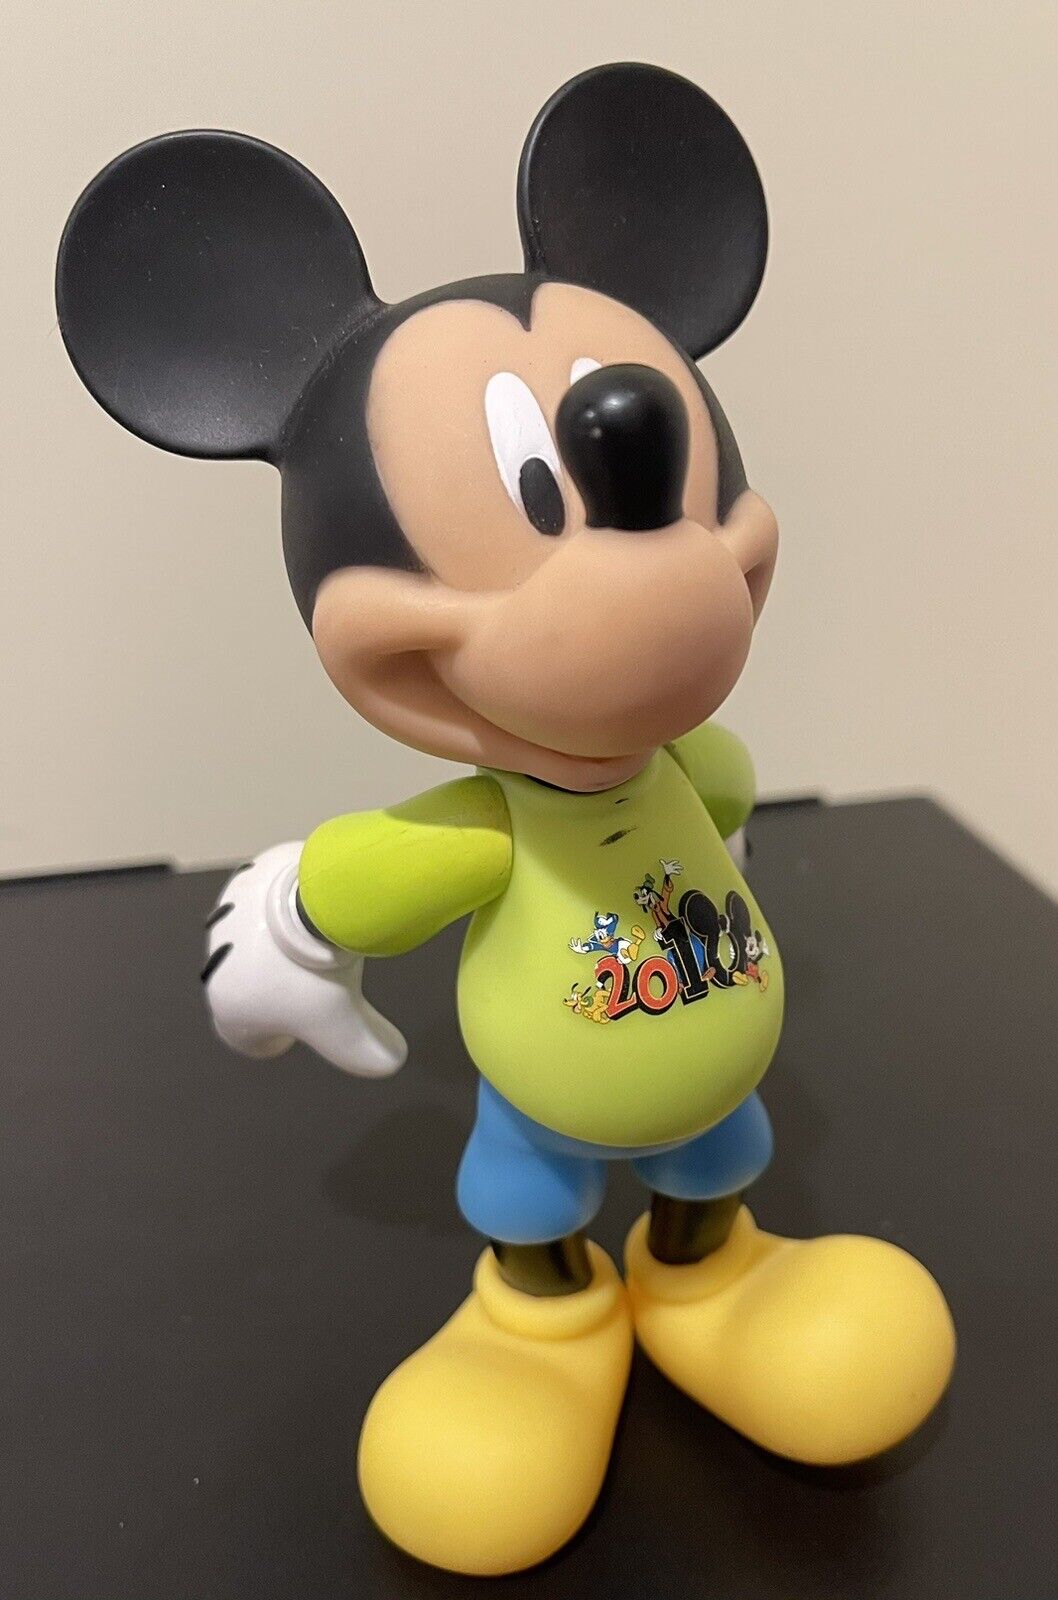 Disney Parks Mickey Mouse 2010 Posable Figure 7”